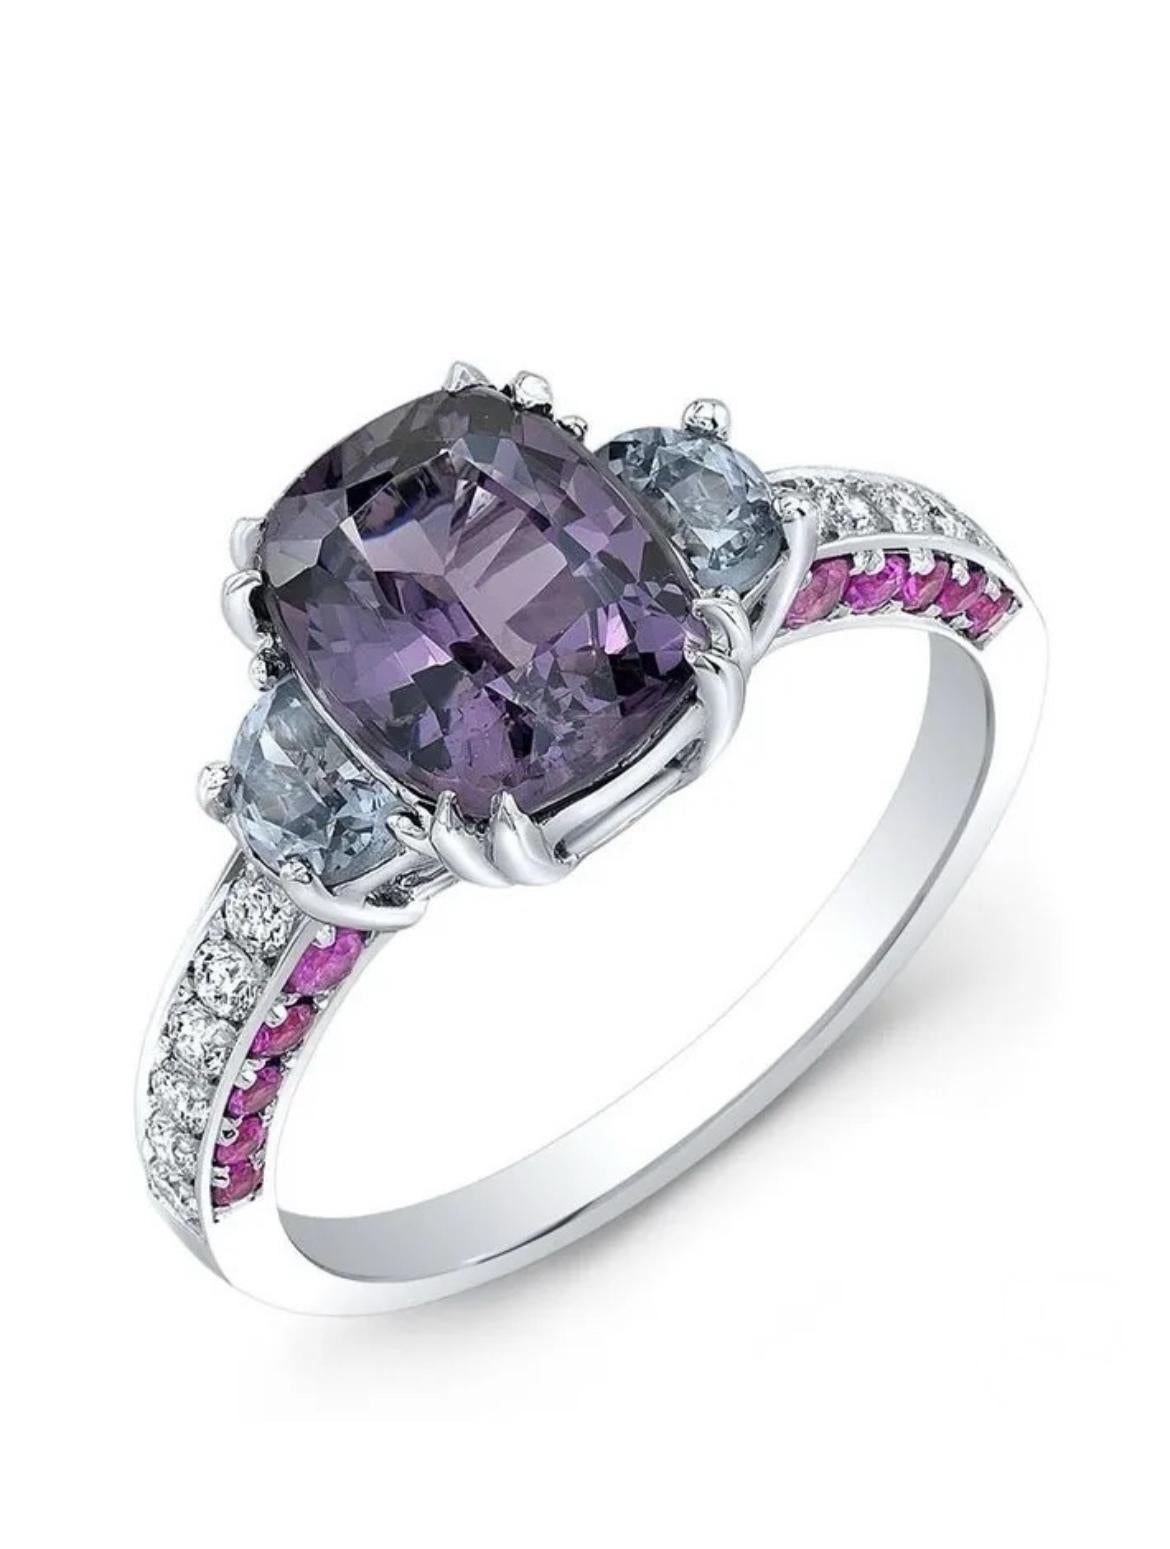 Mixed Cut 2.21ct cushion-cut Burmese Purple-Gray Spinel and Ceylon Pink Sapphire ring. For Sale